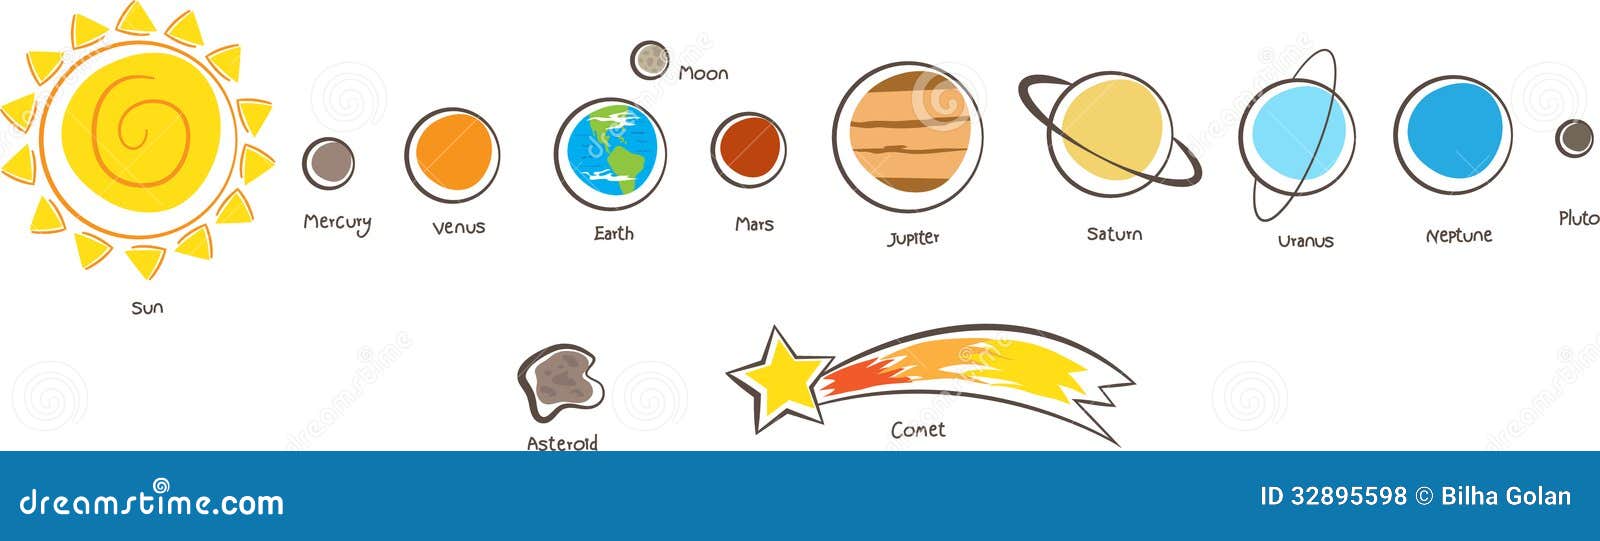 clipart planets solar system - photo #12